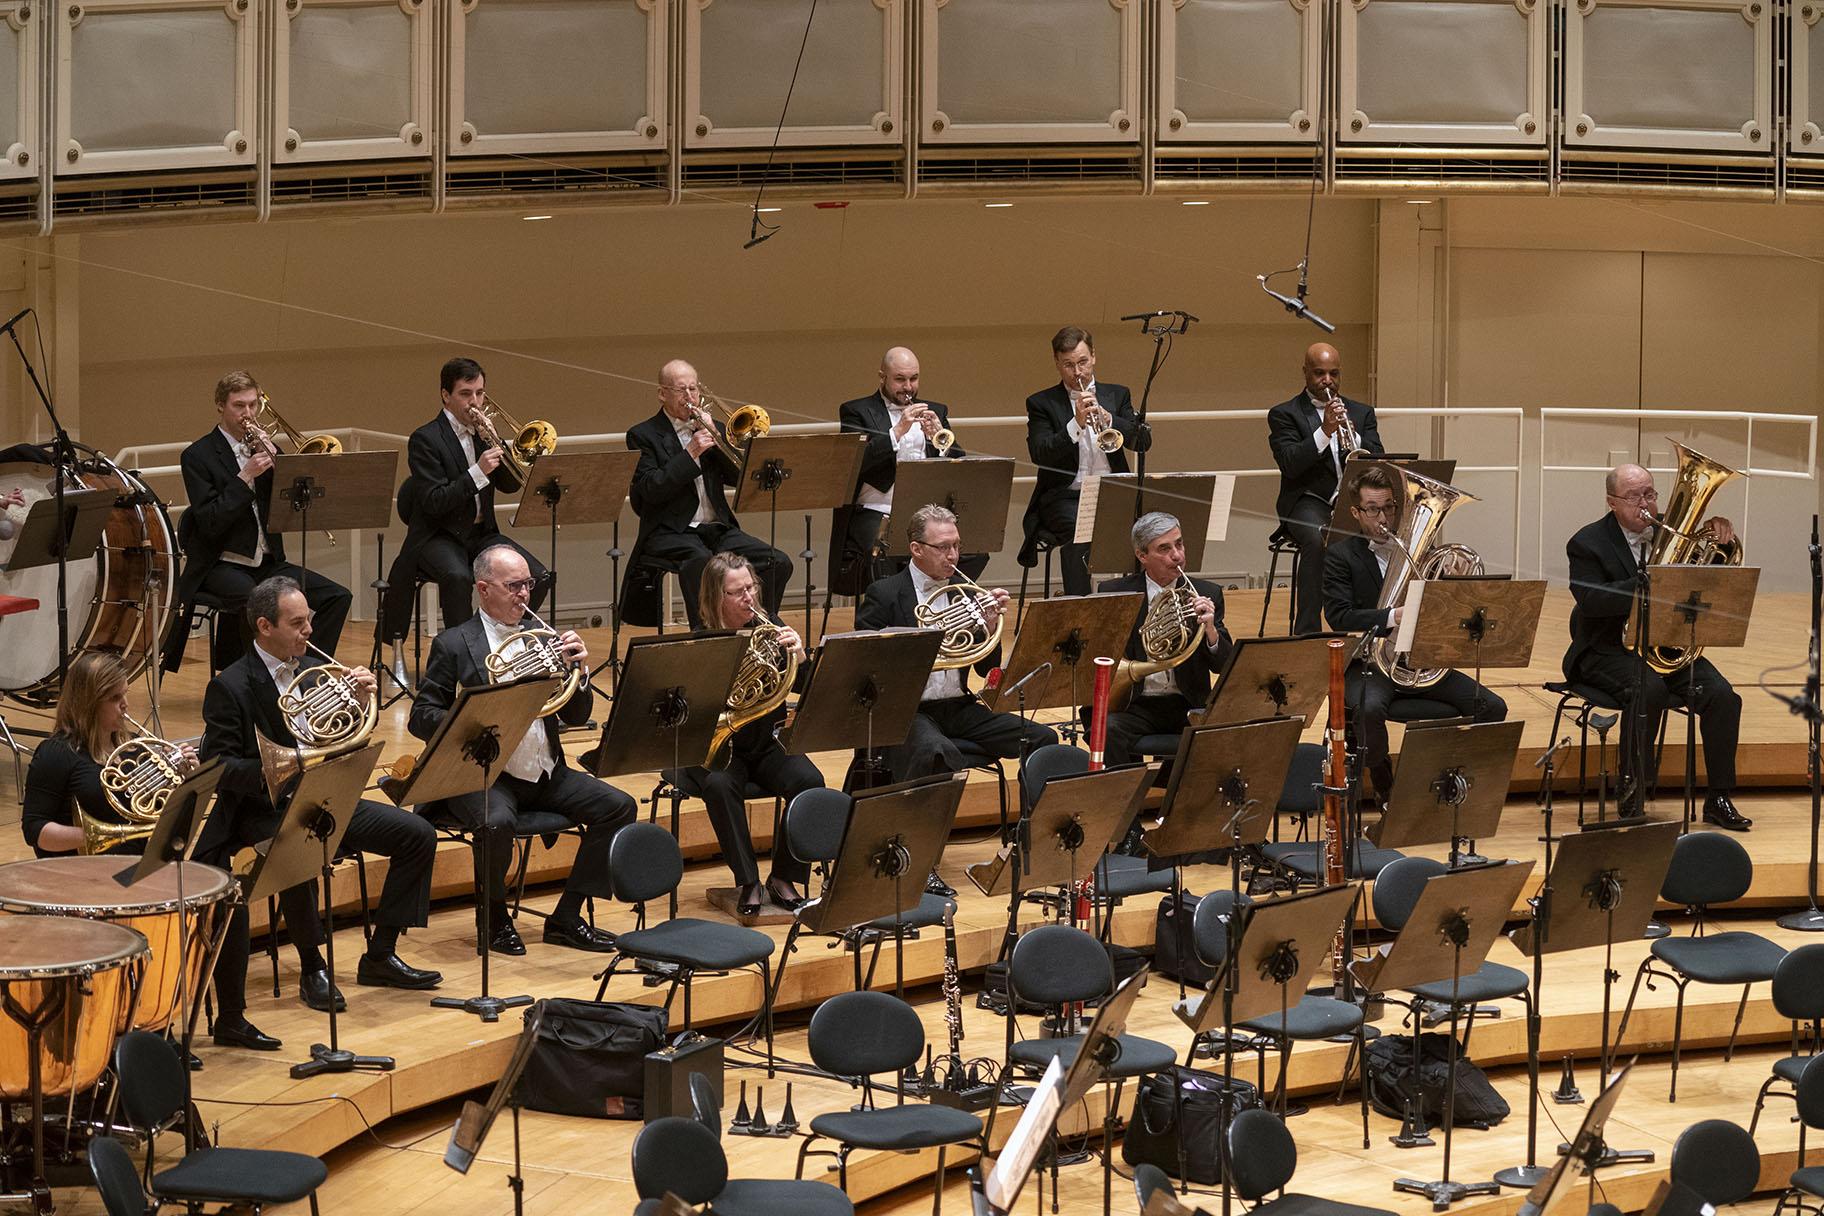 The Chicago Symphony Orchestra Brass performs Tippett’s Praeludium for Brass, Bells and Percussion at Orchestra Hall on Jan. 30, 2020. (Photo credit: Todd Rosenberg)